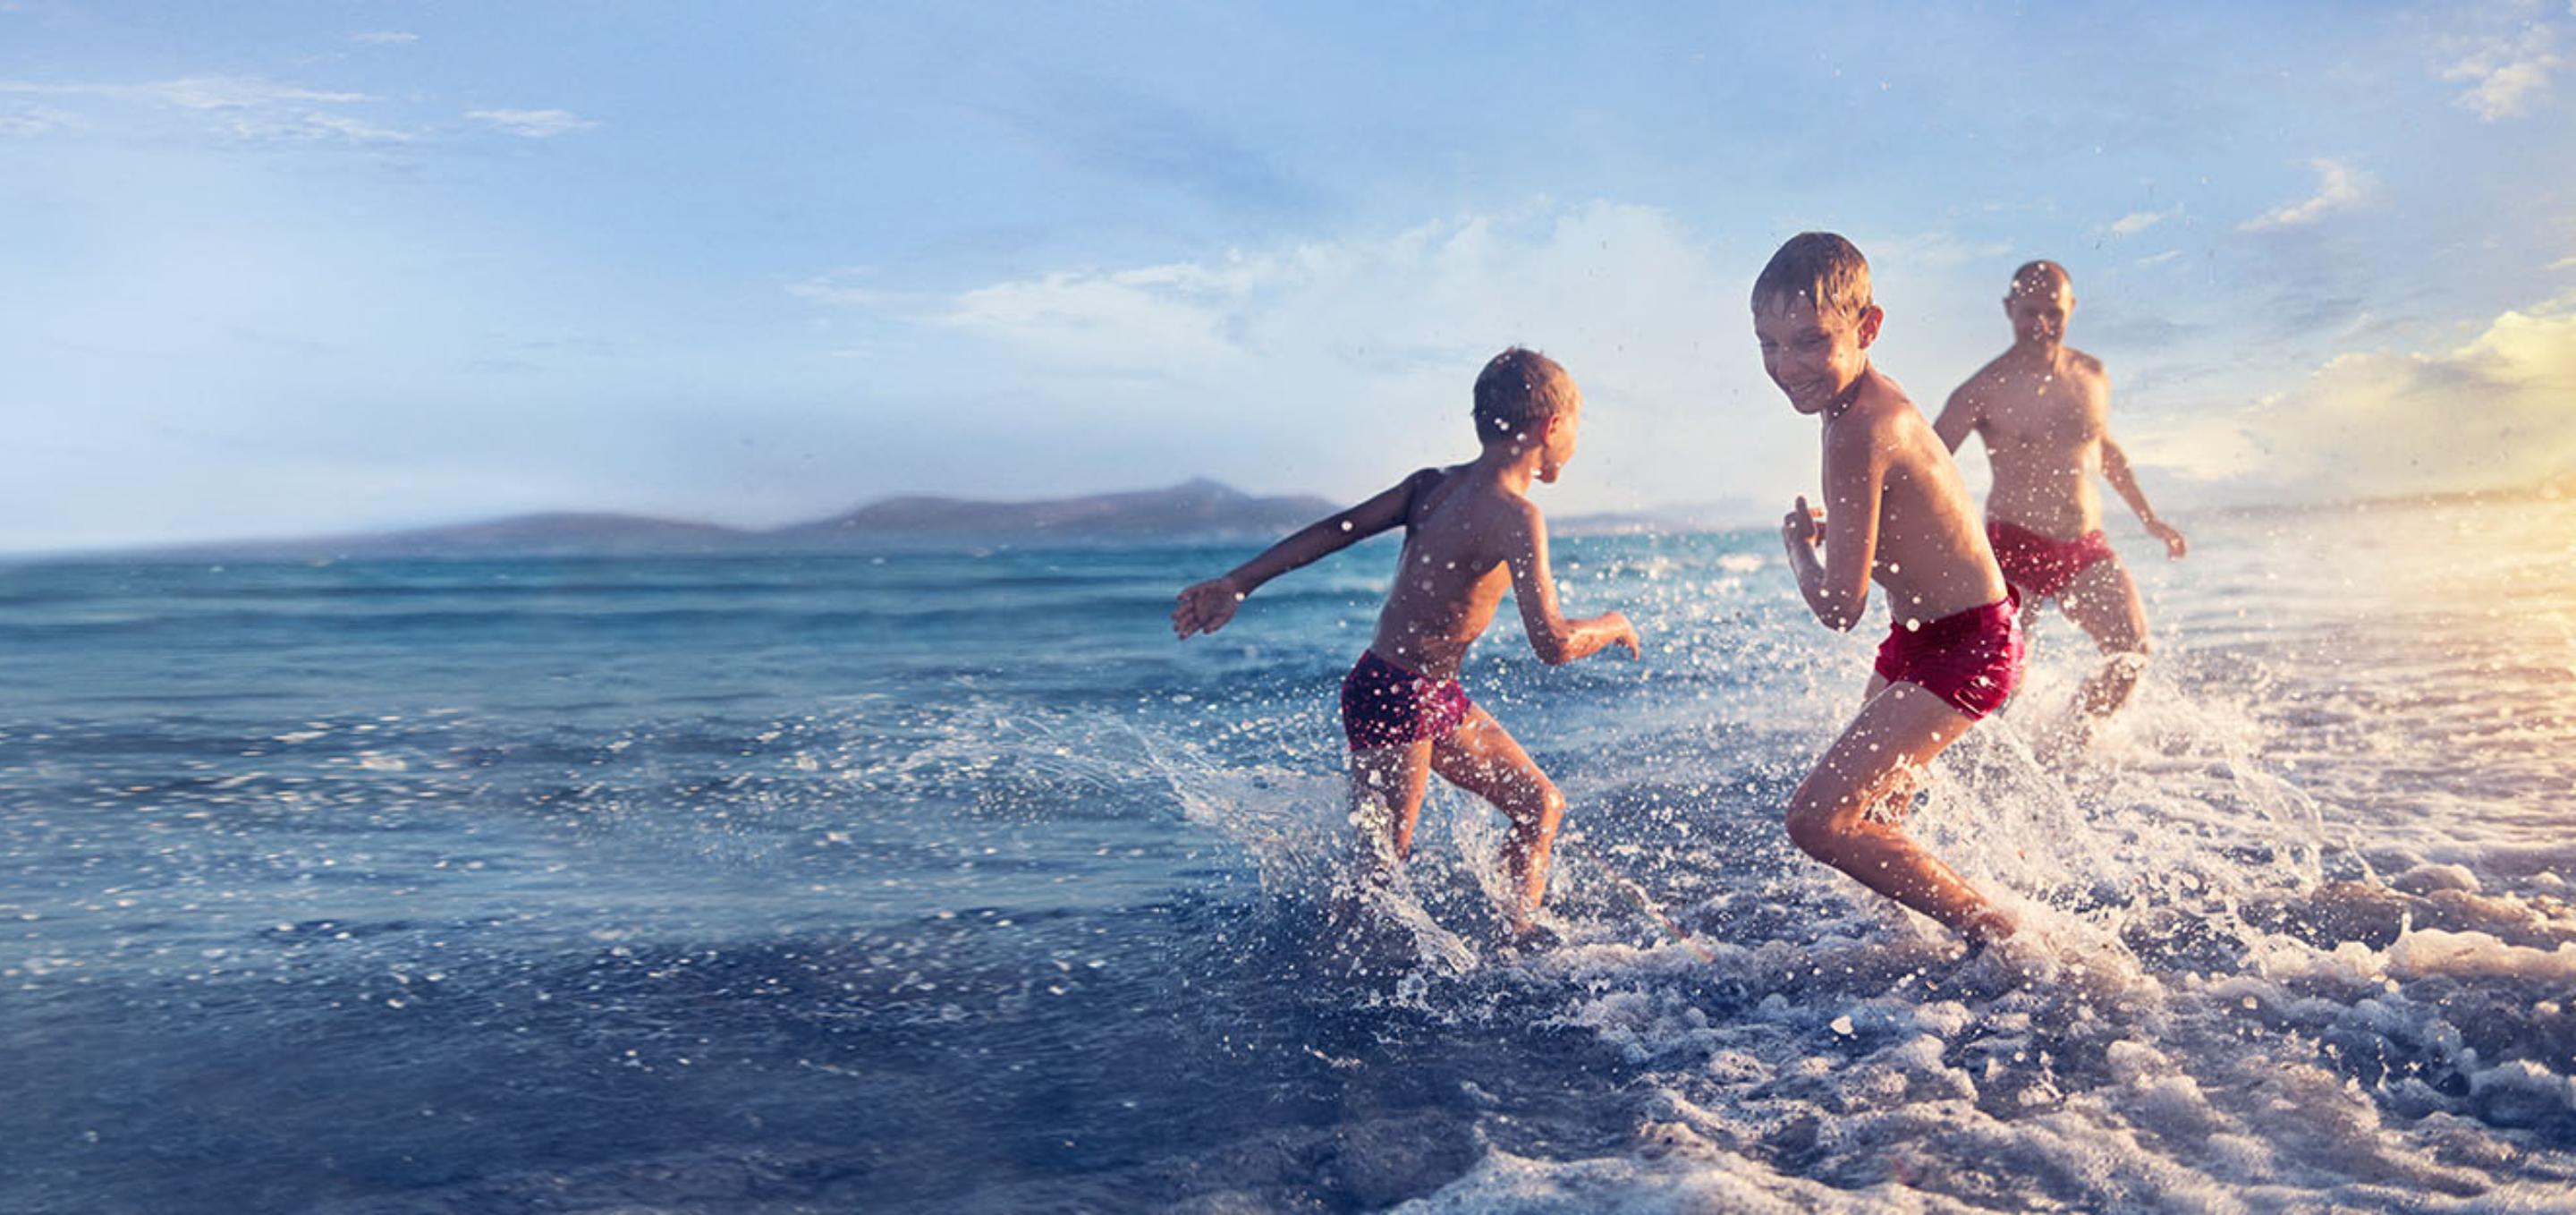 An image of children playing in the sea